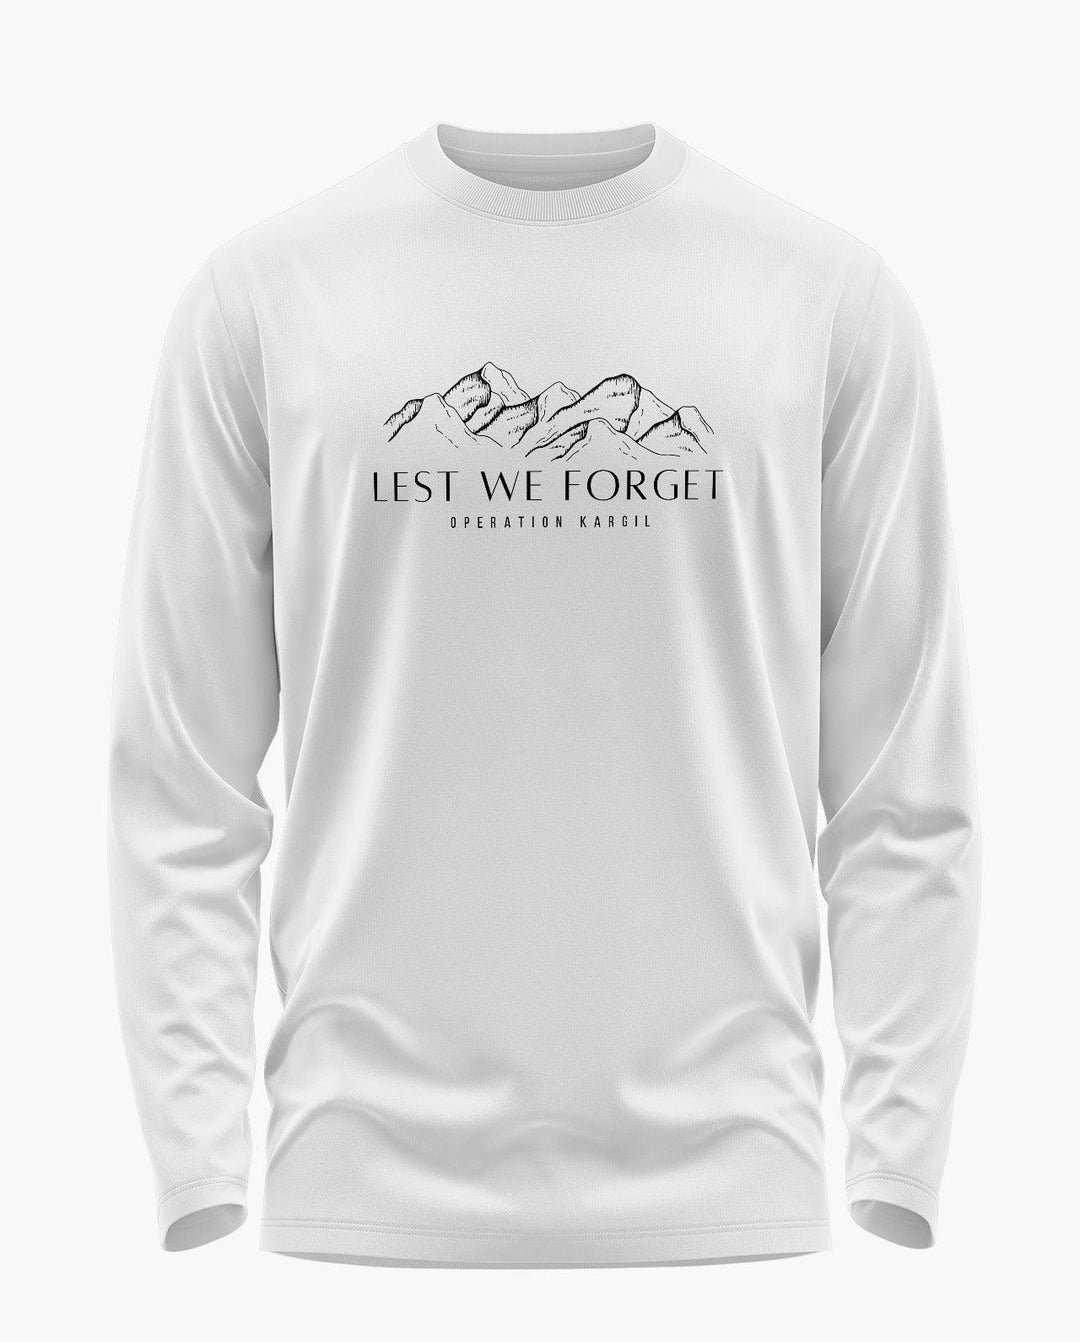 Lest we forget Full Sleeve T-Shirt - Aero Armour